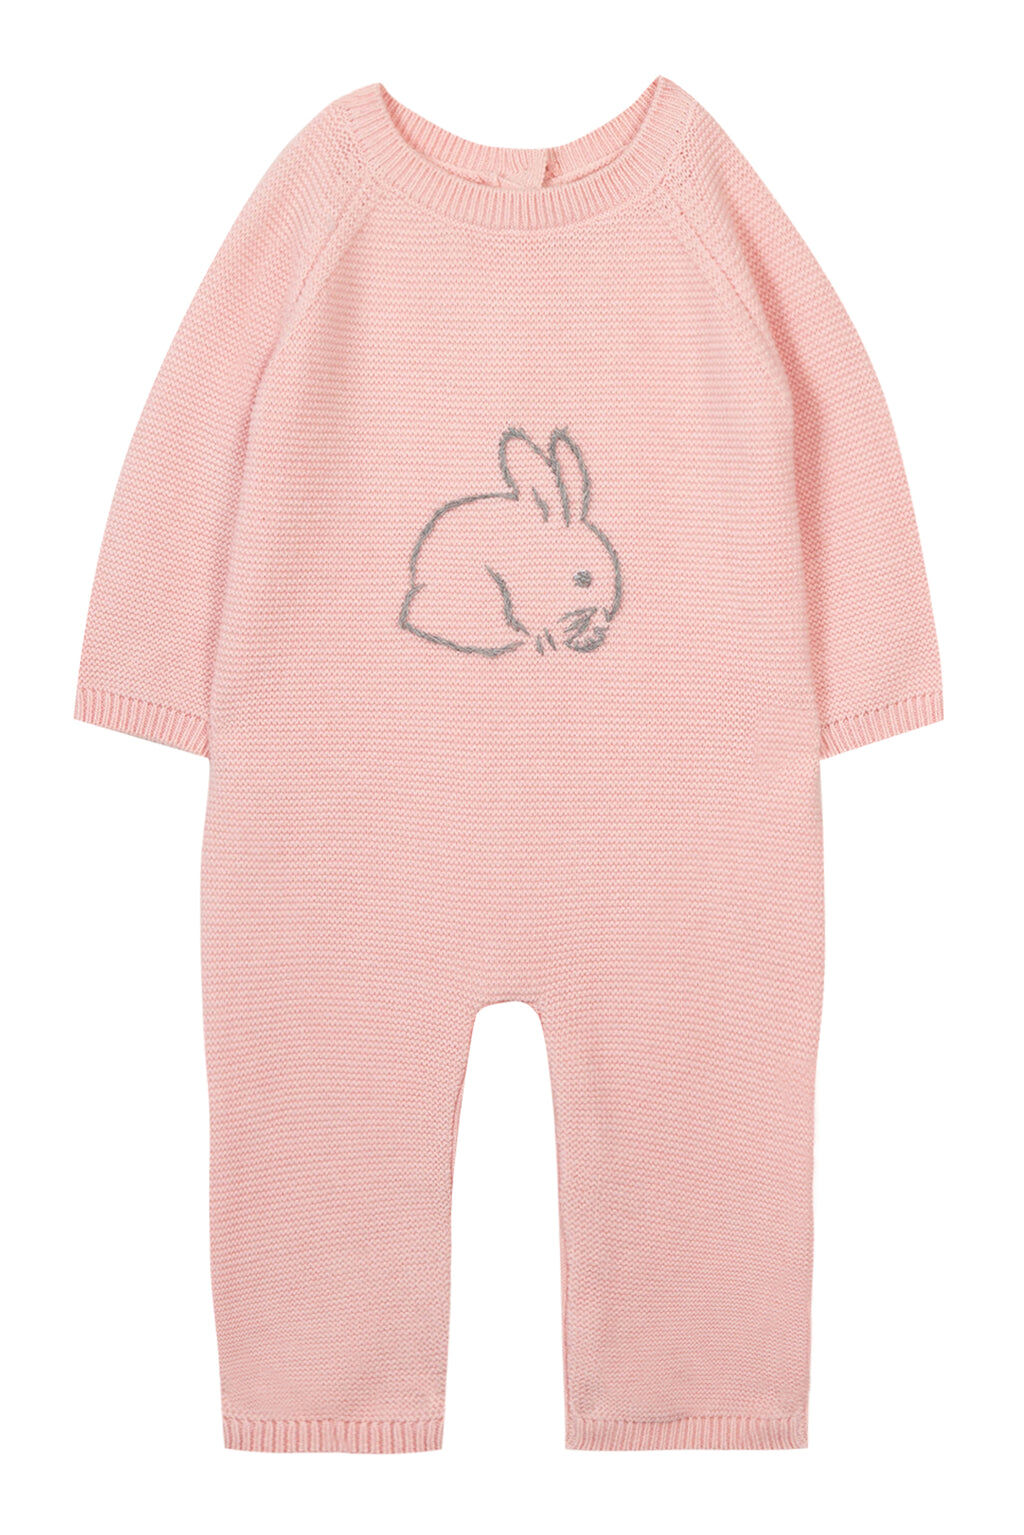 Suit long - Pale pink Embrodery rabbit